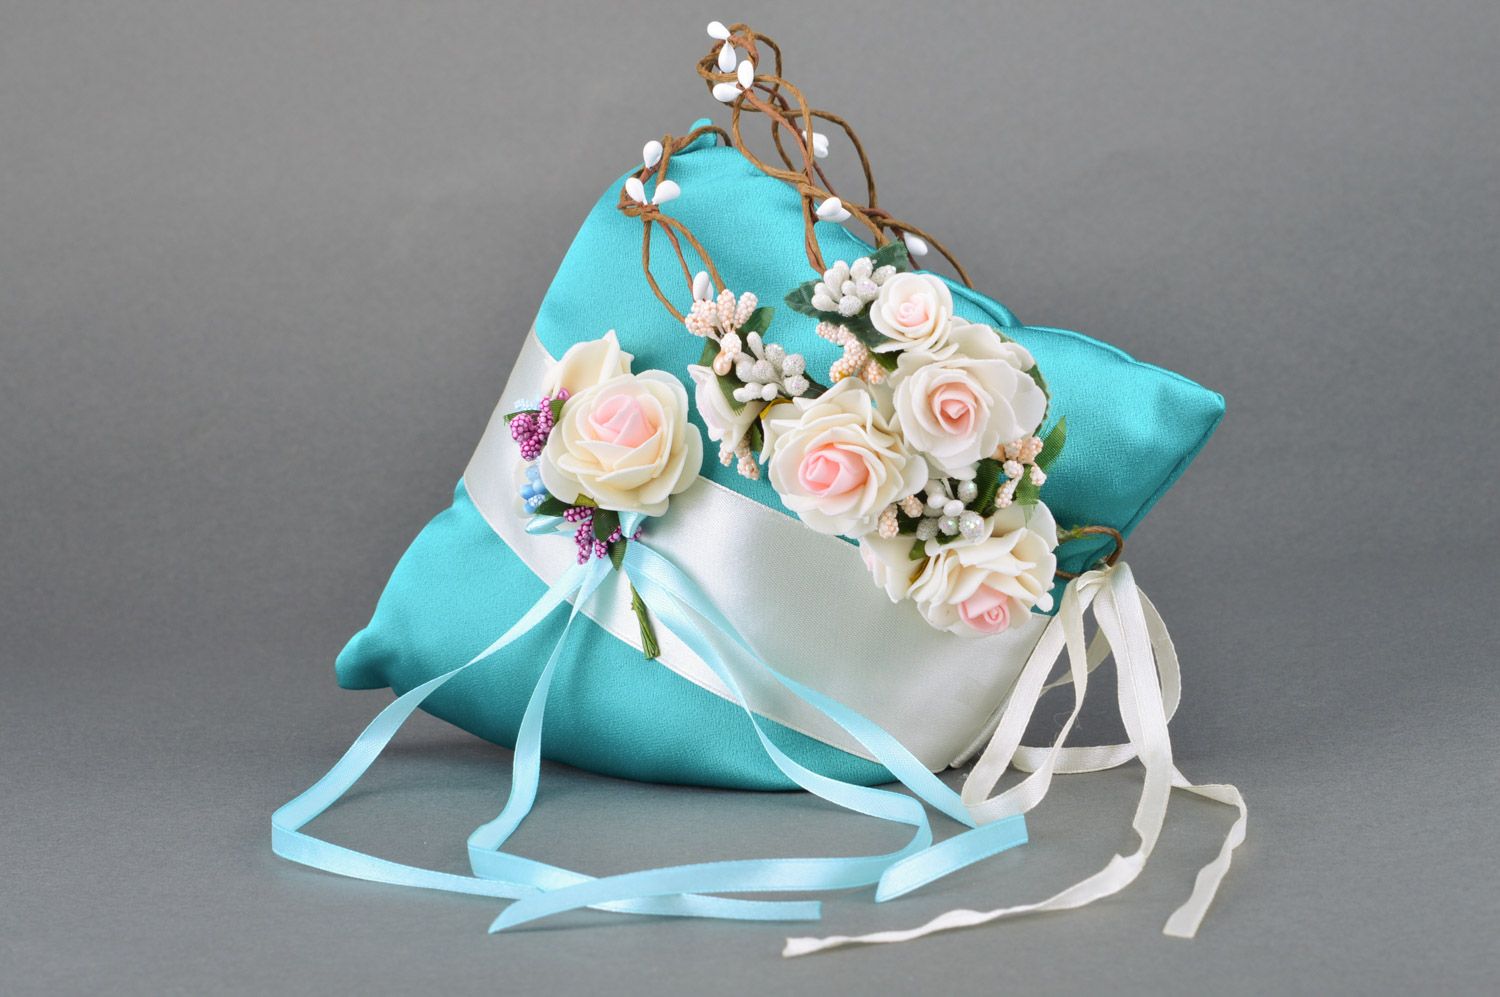 Set of handmade wedding accessories 2 items floral headband and ring pillow  photo 2